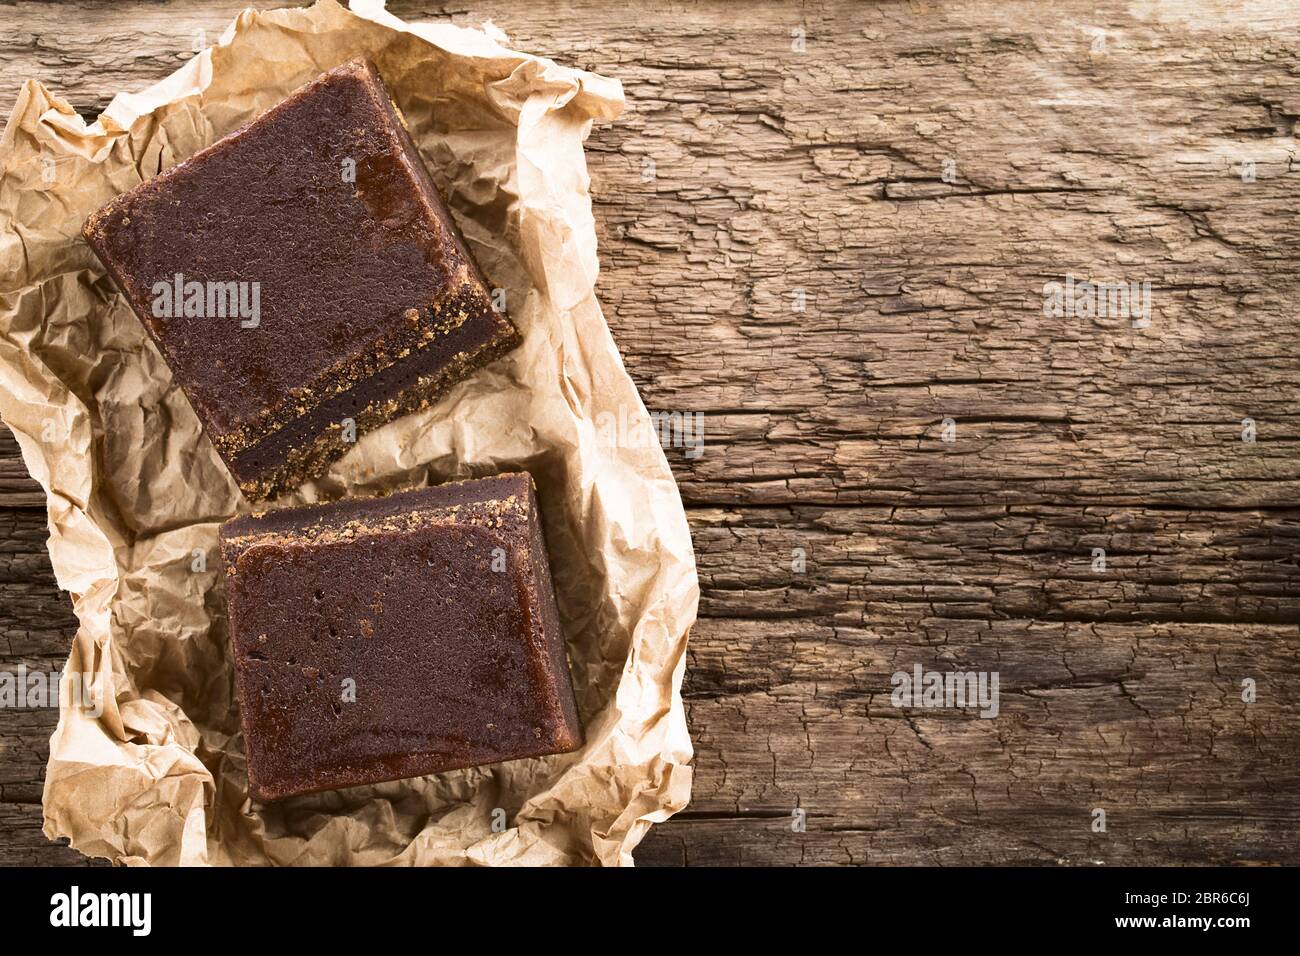 Blocks of chancaca or panela raw unrefined sugar made of sugarcane, used in Latin America to prepare sweet sauces and other sweets, photographed overh Stock Photo